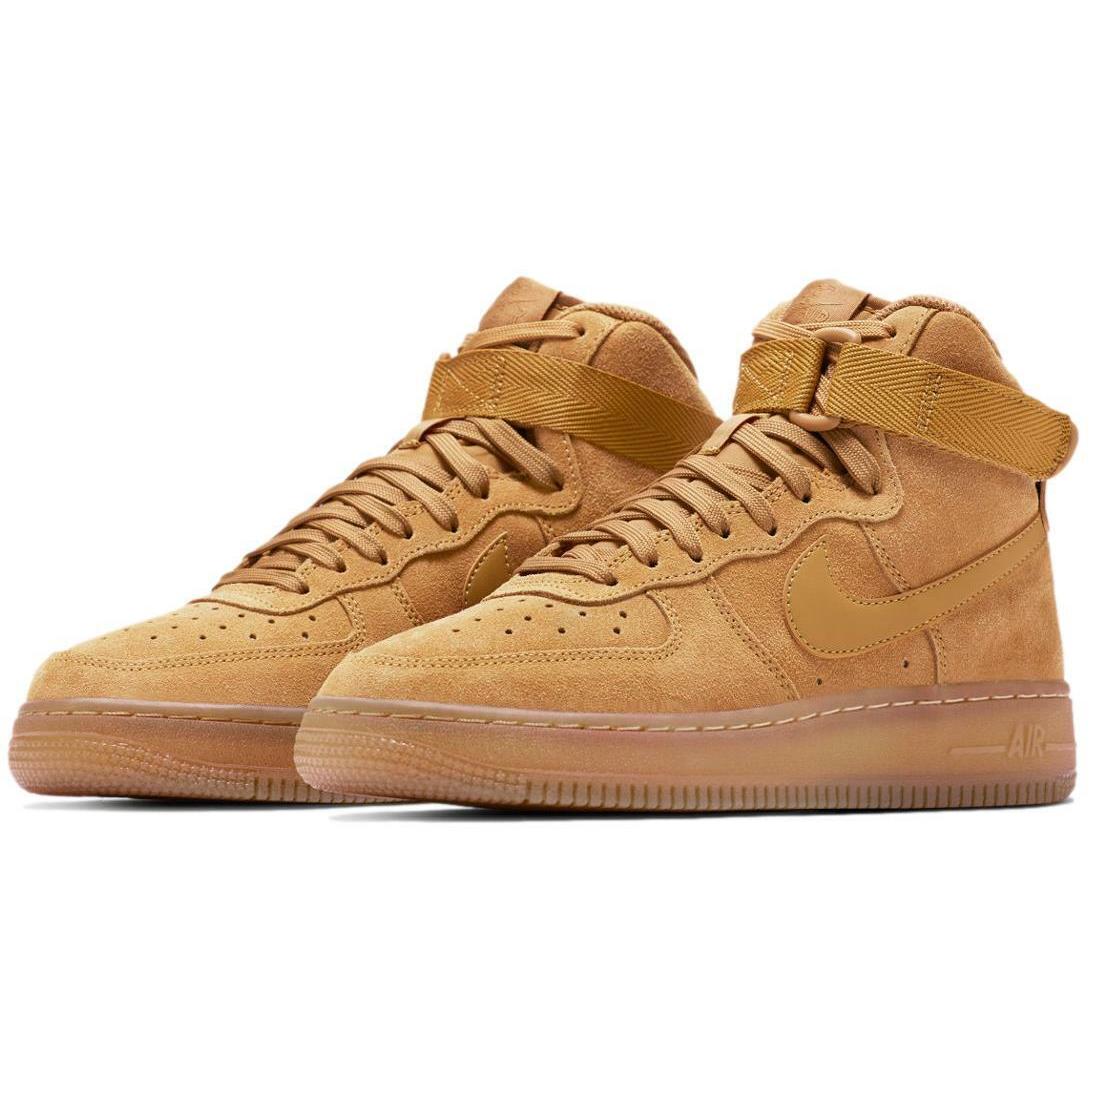 Nike Air Force 1 High LV8 3 GS `wheat` Youth Shoes Sneakers CK0262-700 - Wheat/Wheat-Gum Light Brown